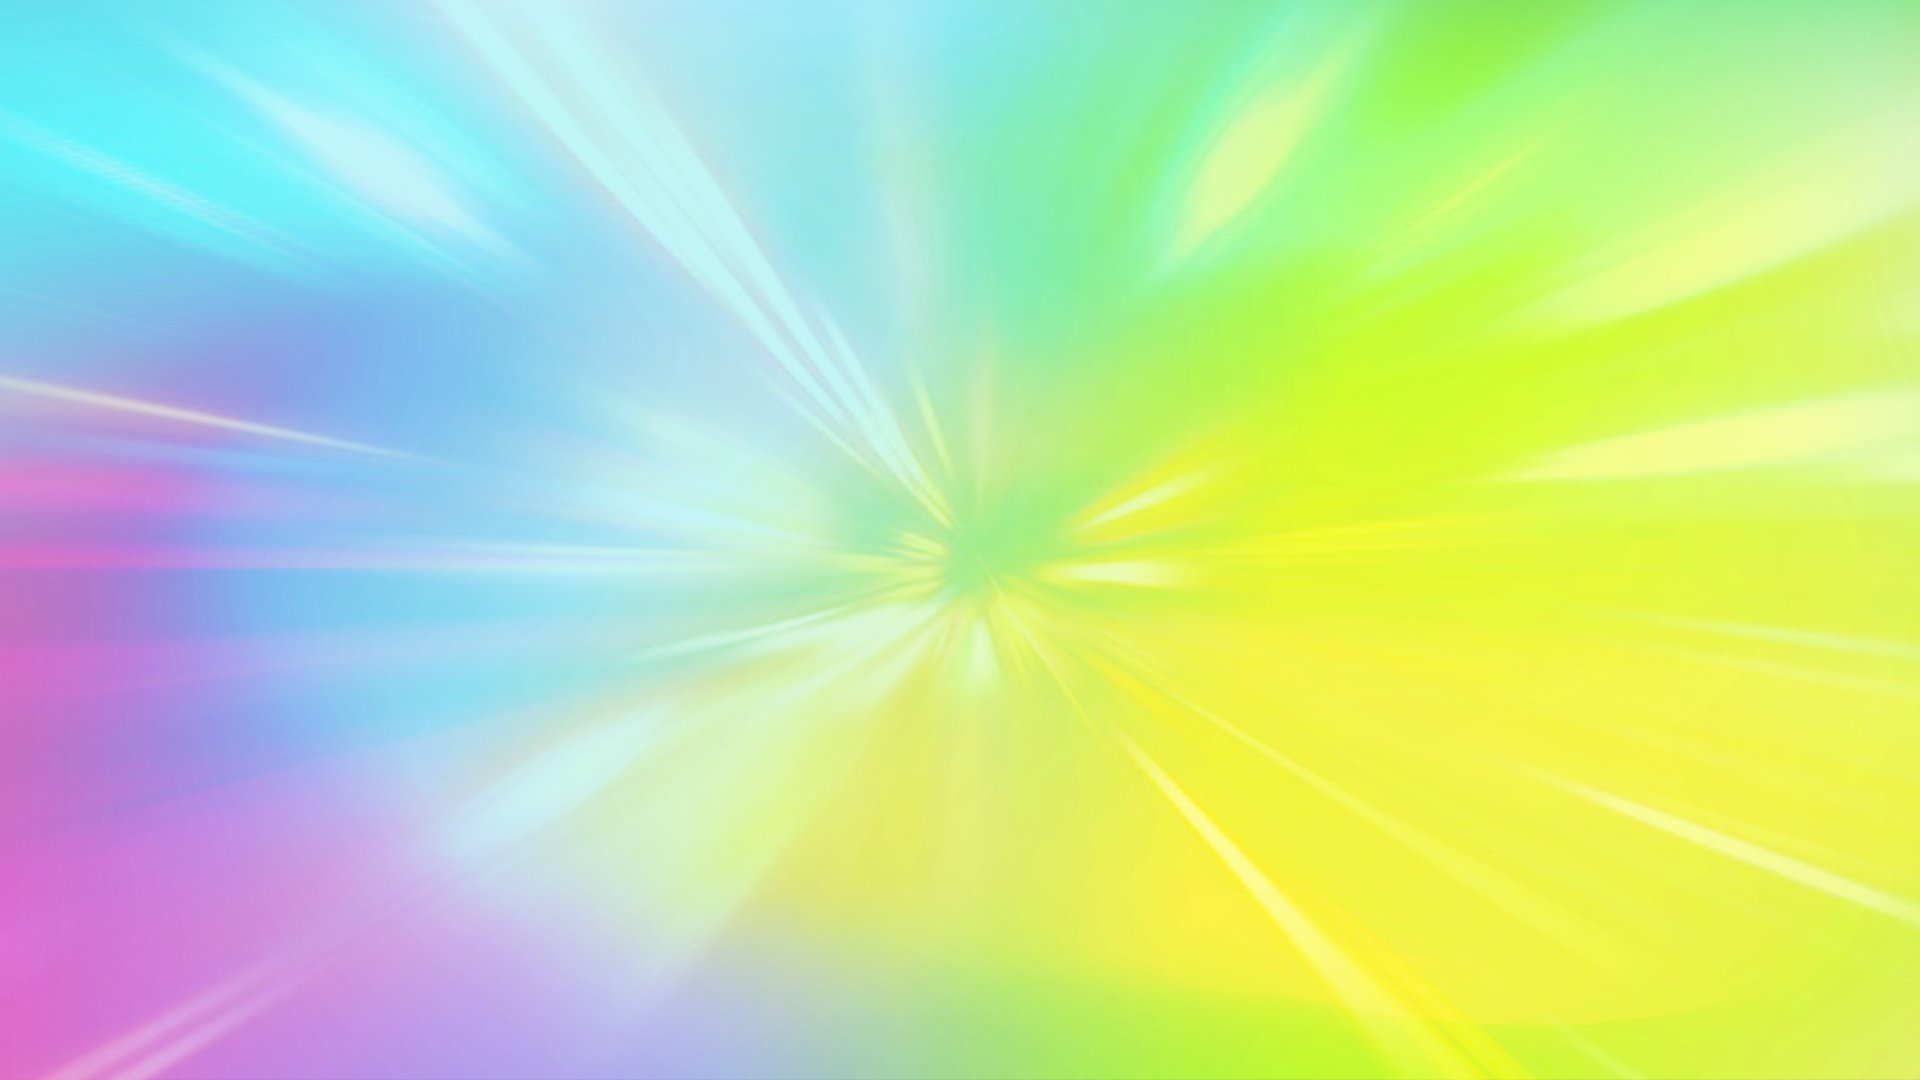 Gradient background #17 by Mimosa